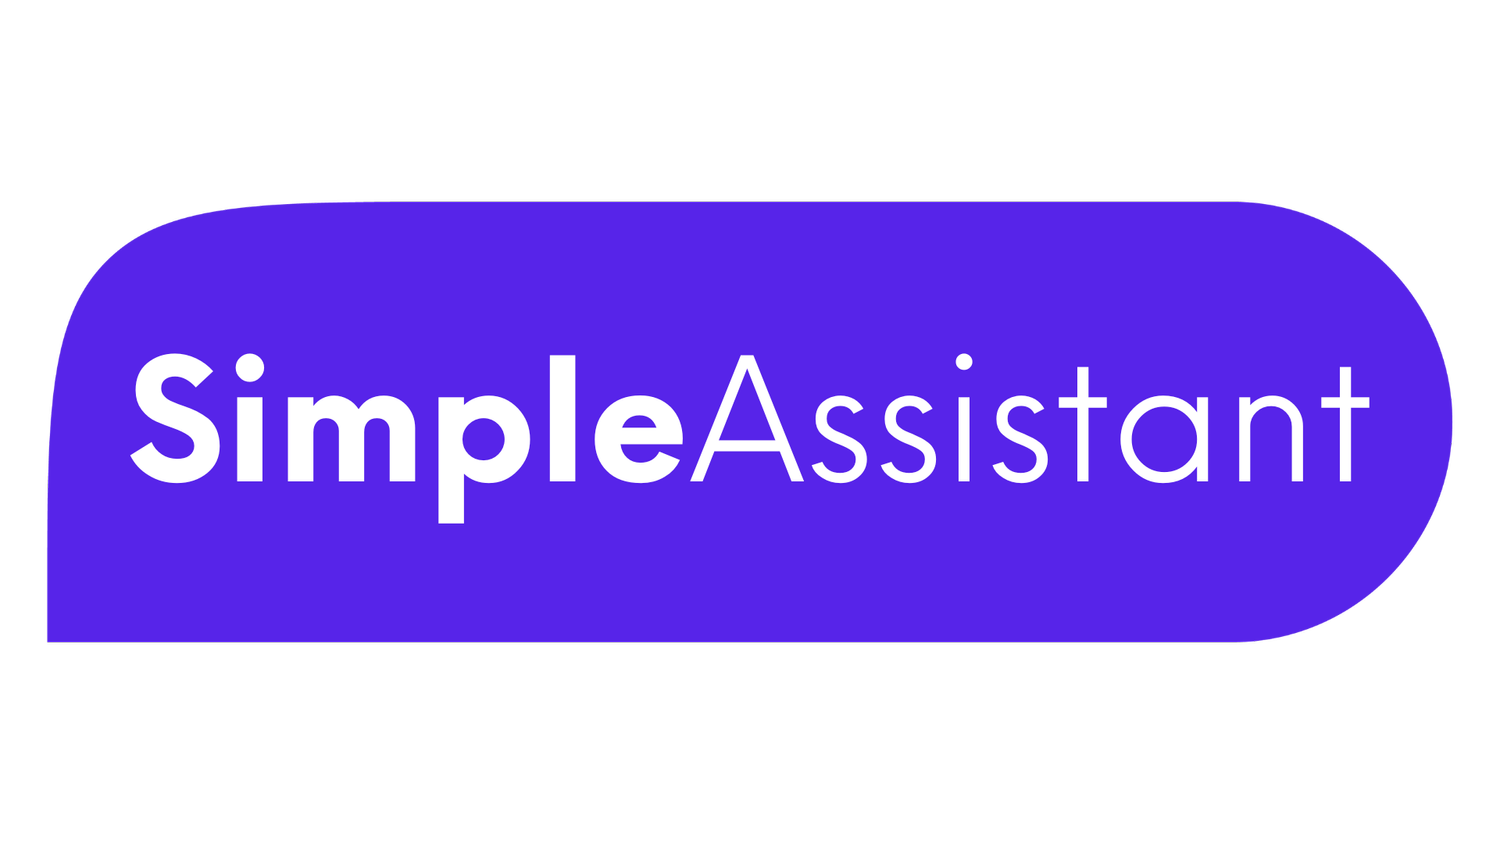 Simple Assistant